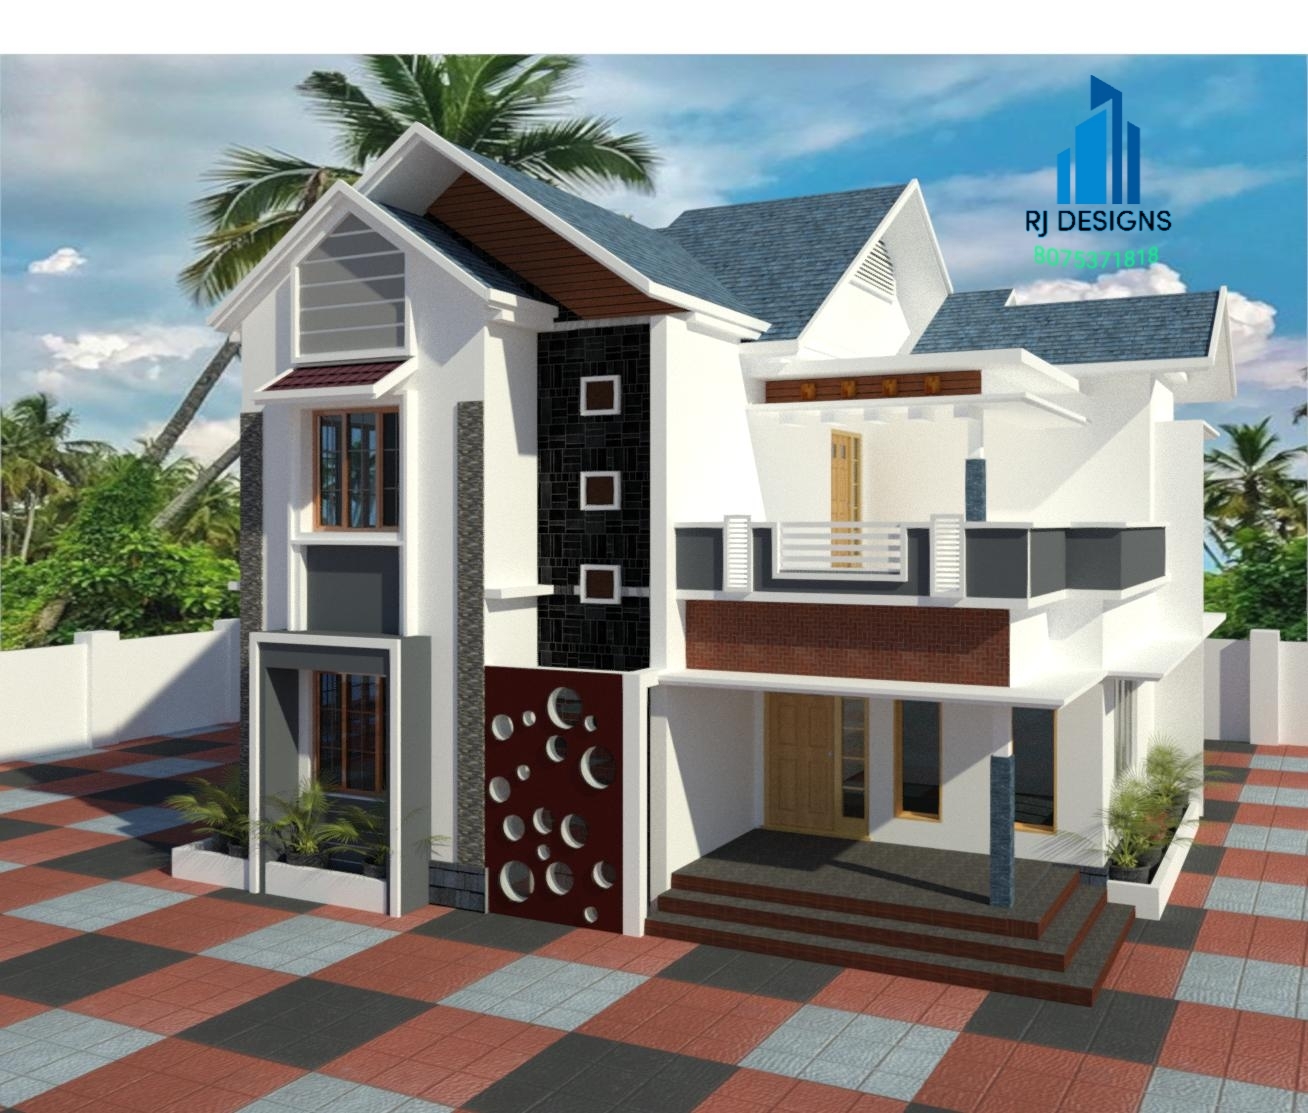 we will design your dream home